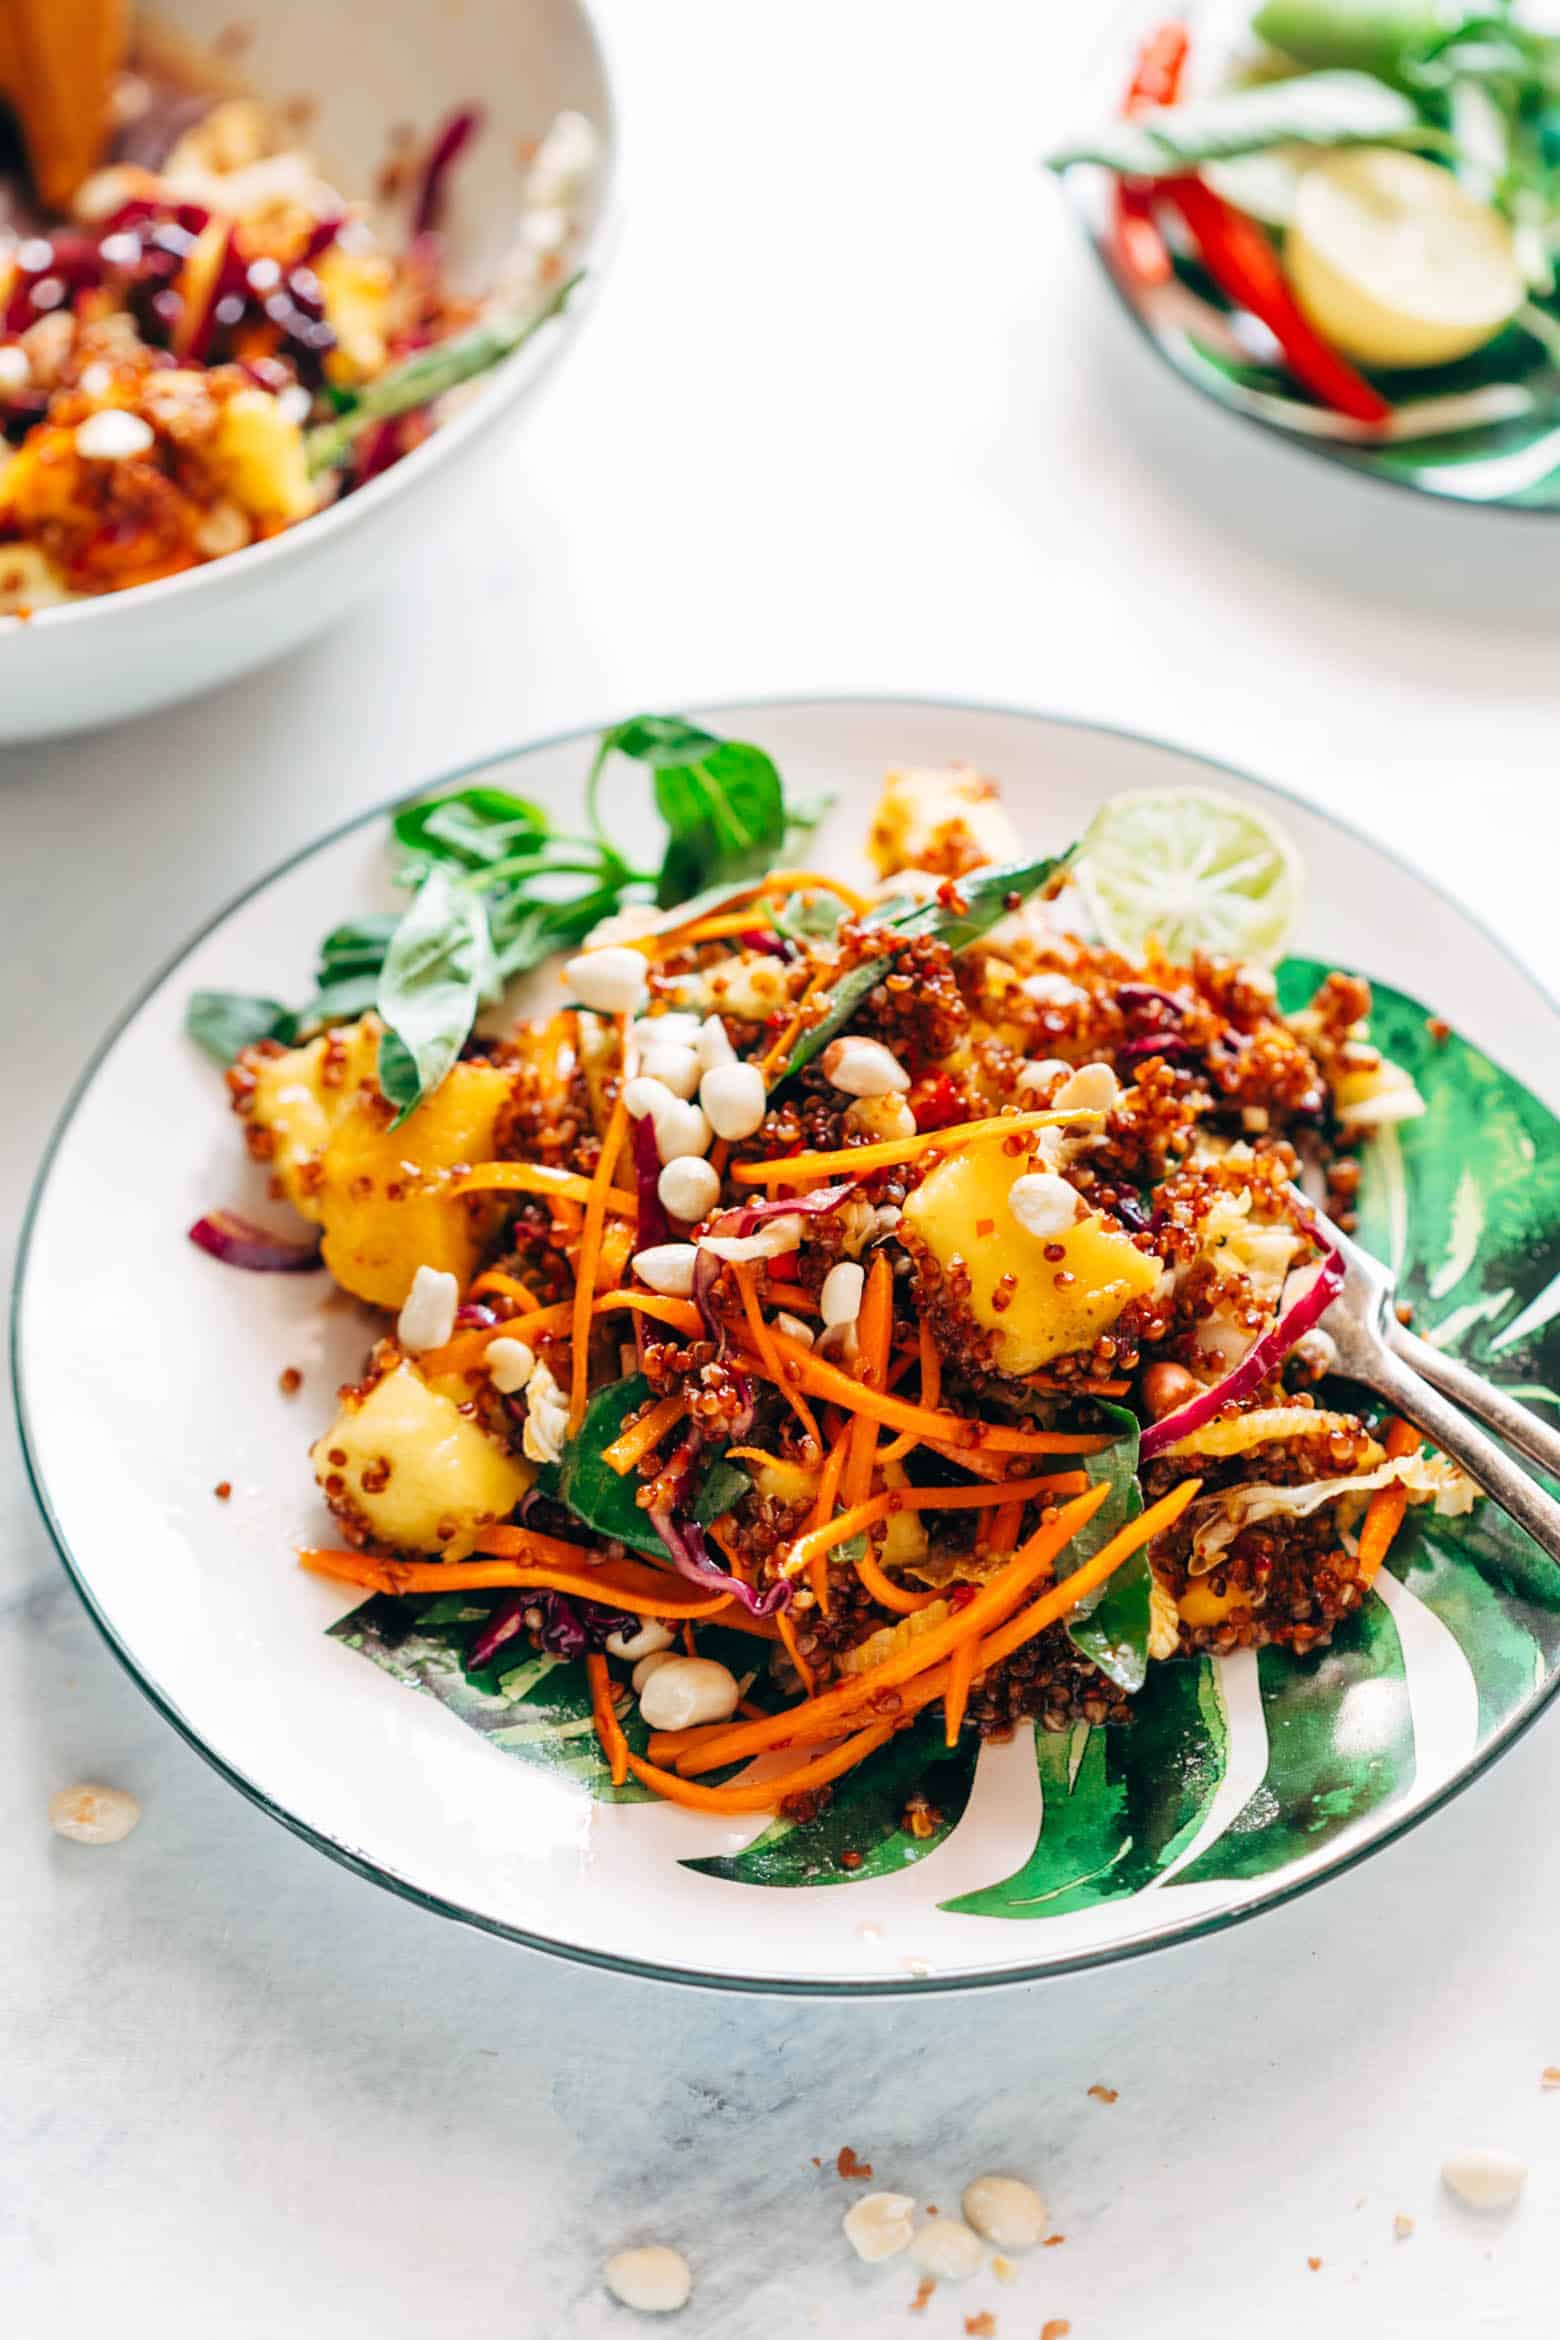 Super delicious Thai Peanut Mango Quinoa Salad which you can make ahead for potlucks and barbecues and also happens to be gluten free and vegan! Comes with a finger licking sweet and spicy sambal dressing that's different from the regular peanut dressing.